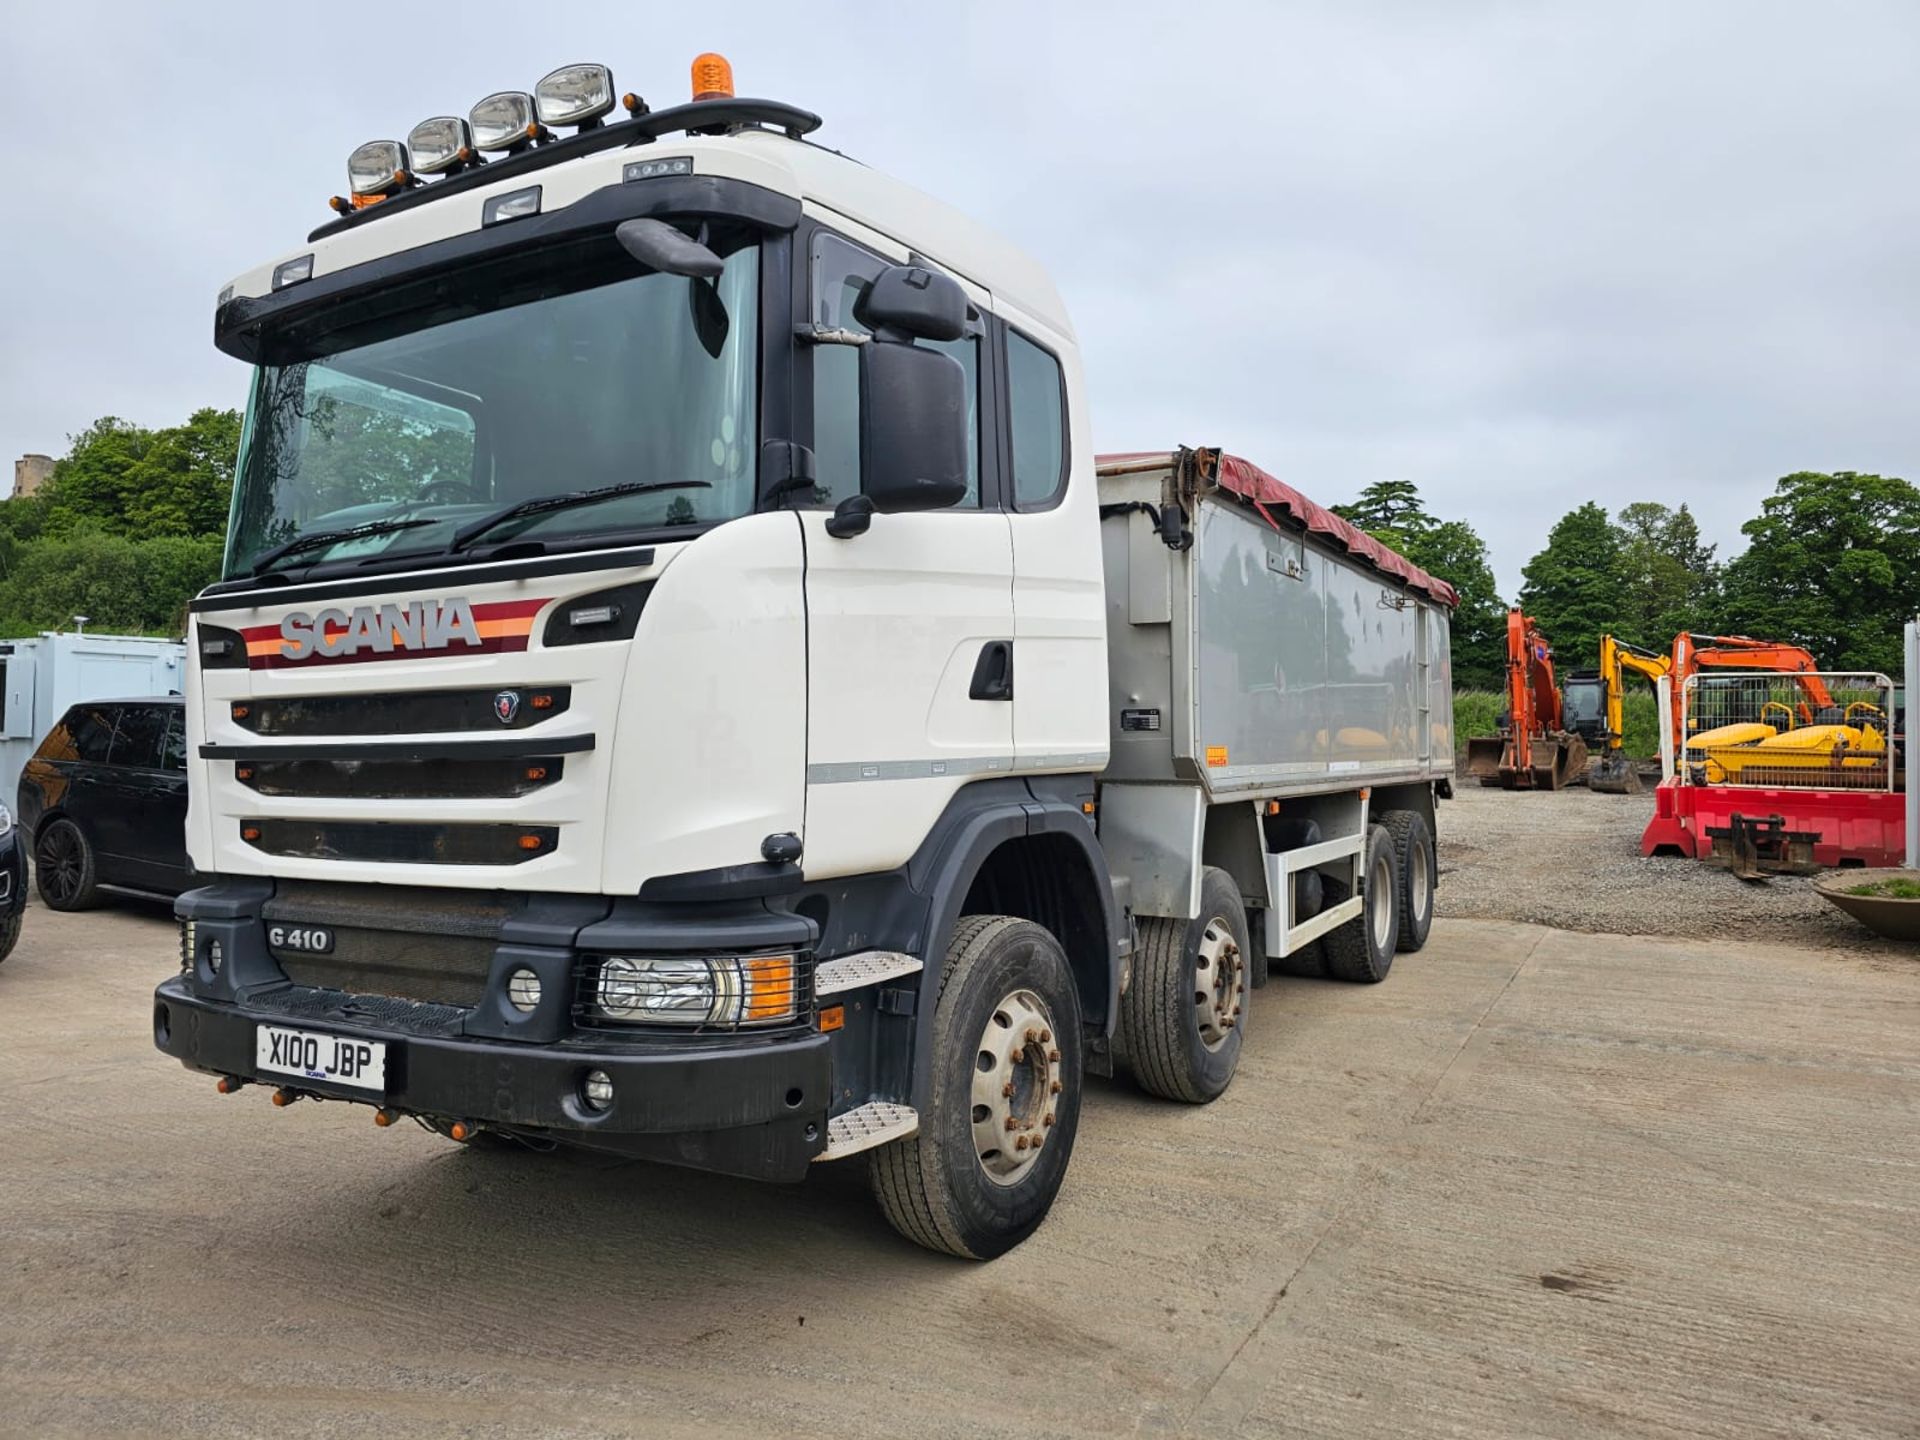 2015, Scania G410 Tippers - Image 7 of 11